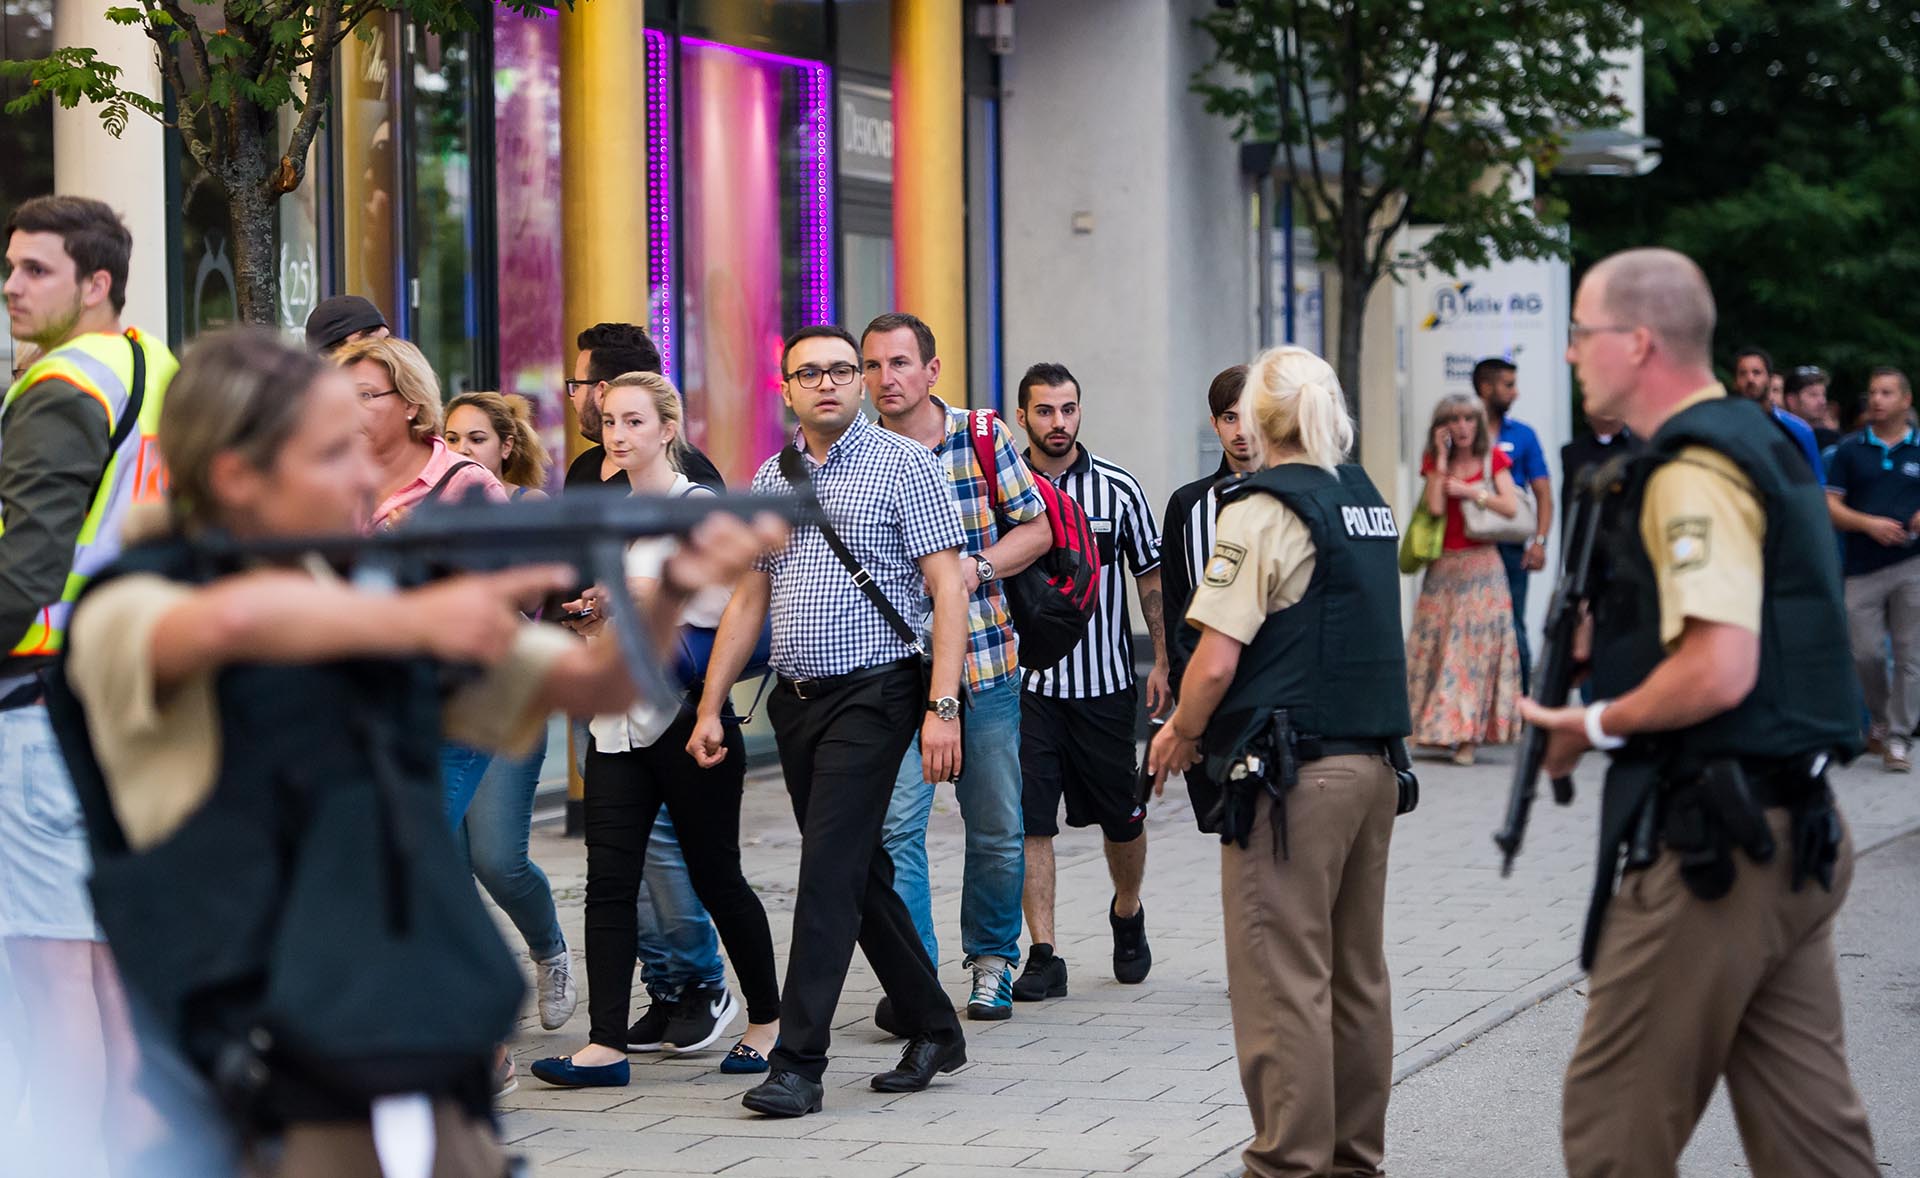 Police evacuates people from the shopping mall in Munich on July 22, 2016 following a shootings earlier. At least one person has been killed and 10 wounded in a shooting at a shopping centre in Munich on Friday, German police said. / AFP PHOTO / STR